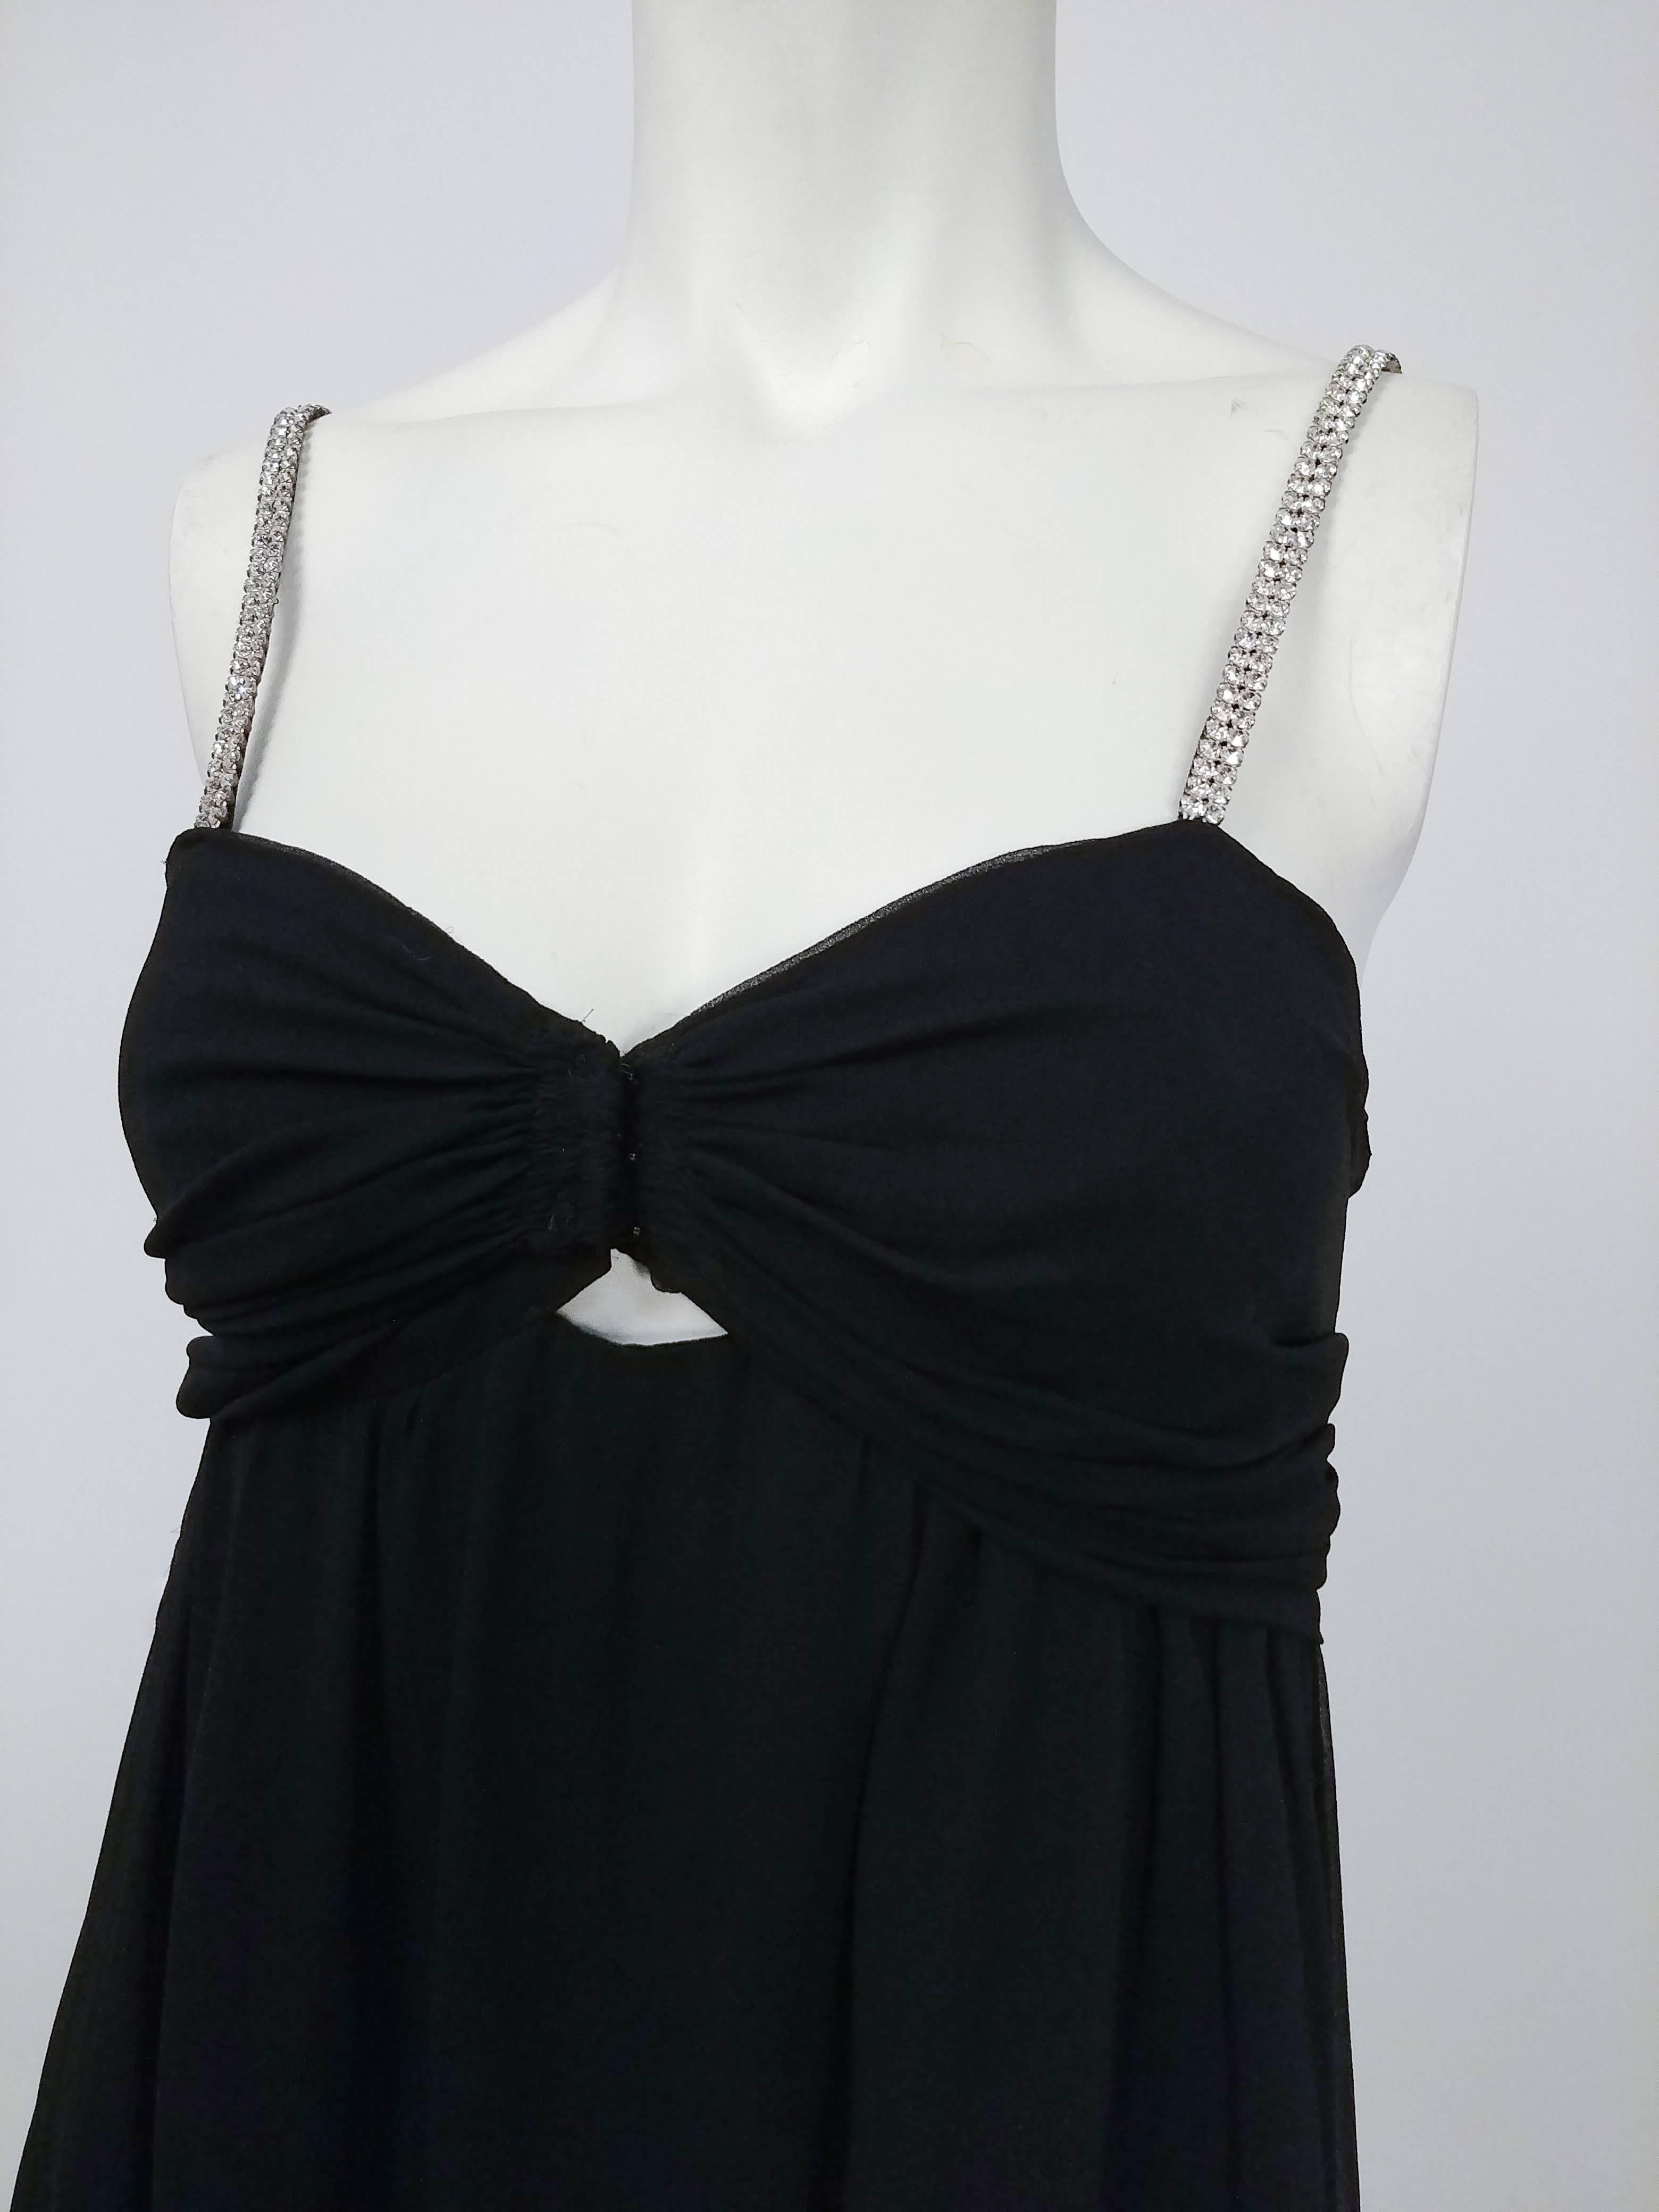 1930s Black Chiffon Gown w/ Rhinestone Straps. Silk chiffon gown with ruched empire neckline with keyhold under at waistline. Hooks closed at bust, and opens via snaps at one side. 